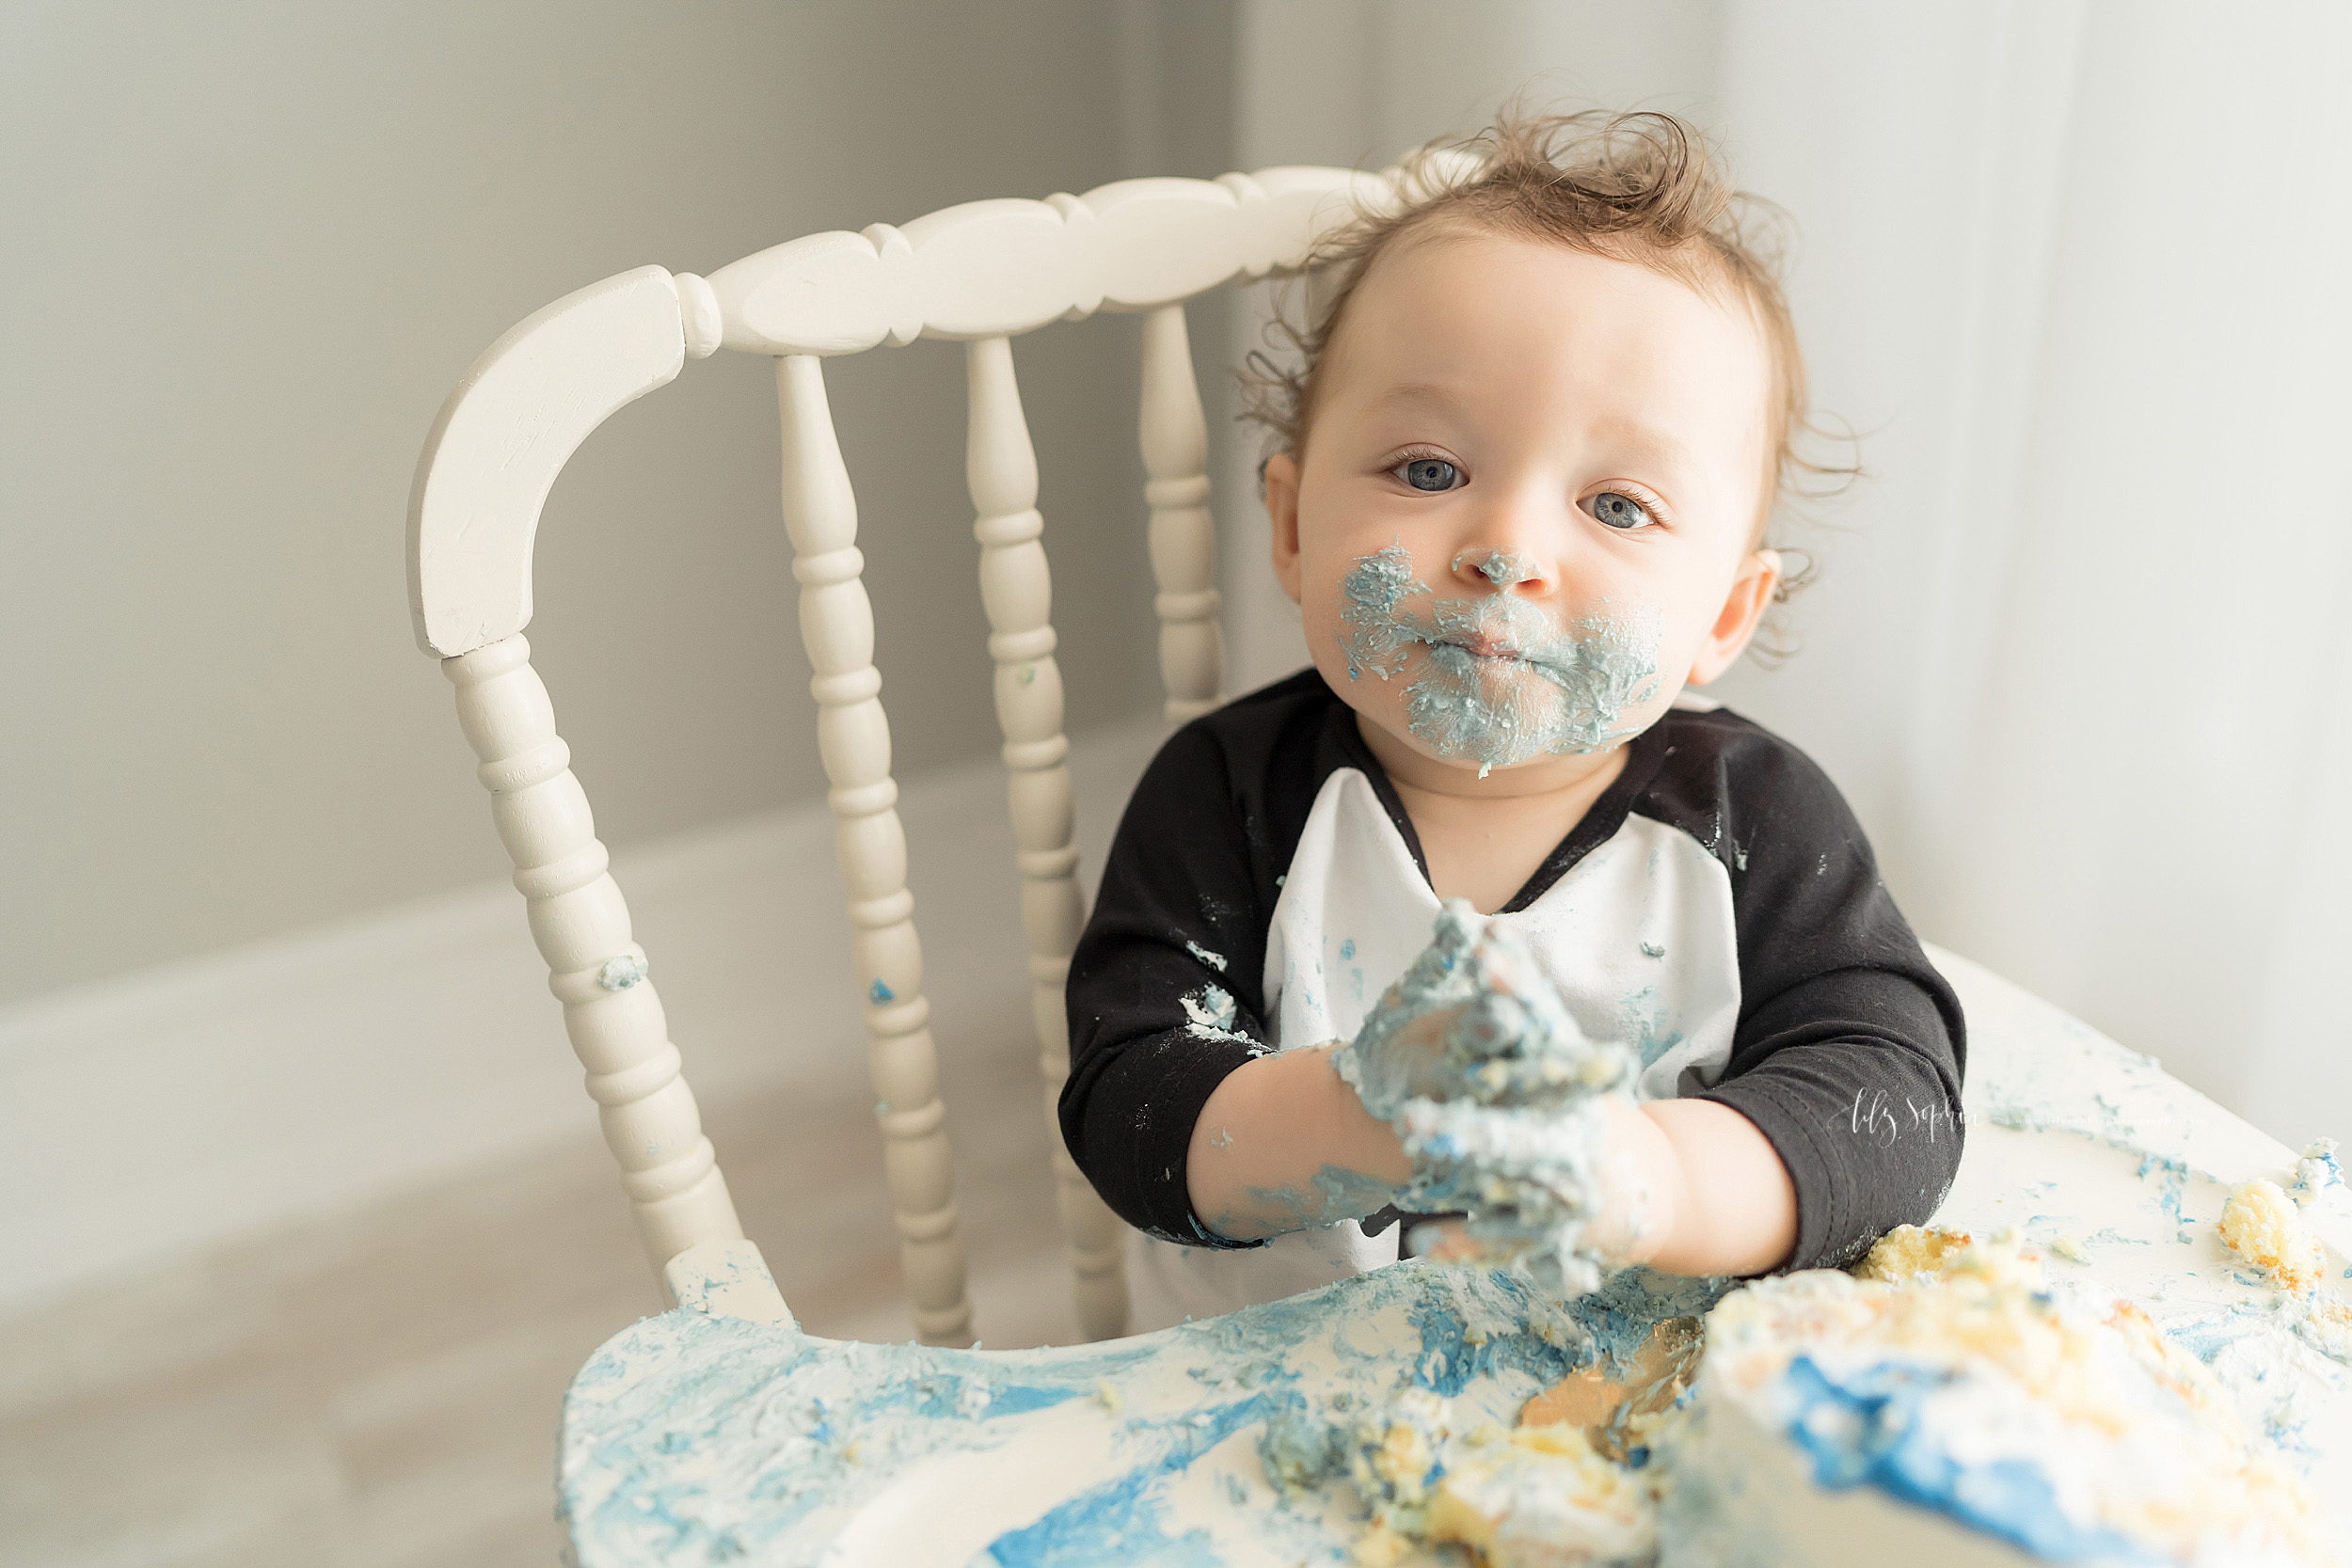  Cake smash photo of a one year old boy taken in a natural light Atlanta studio.  The happy curly haired little boy is sitting in an antique high chair with blue icing on his face and hands and cake and icing smashed all over the high chair tray. 